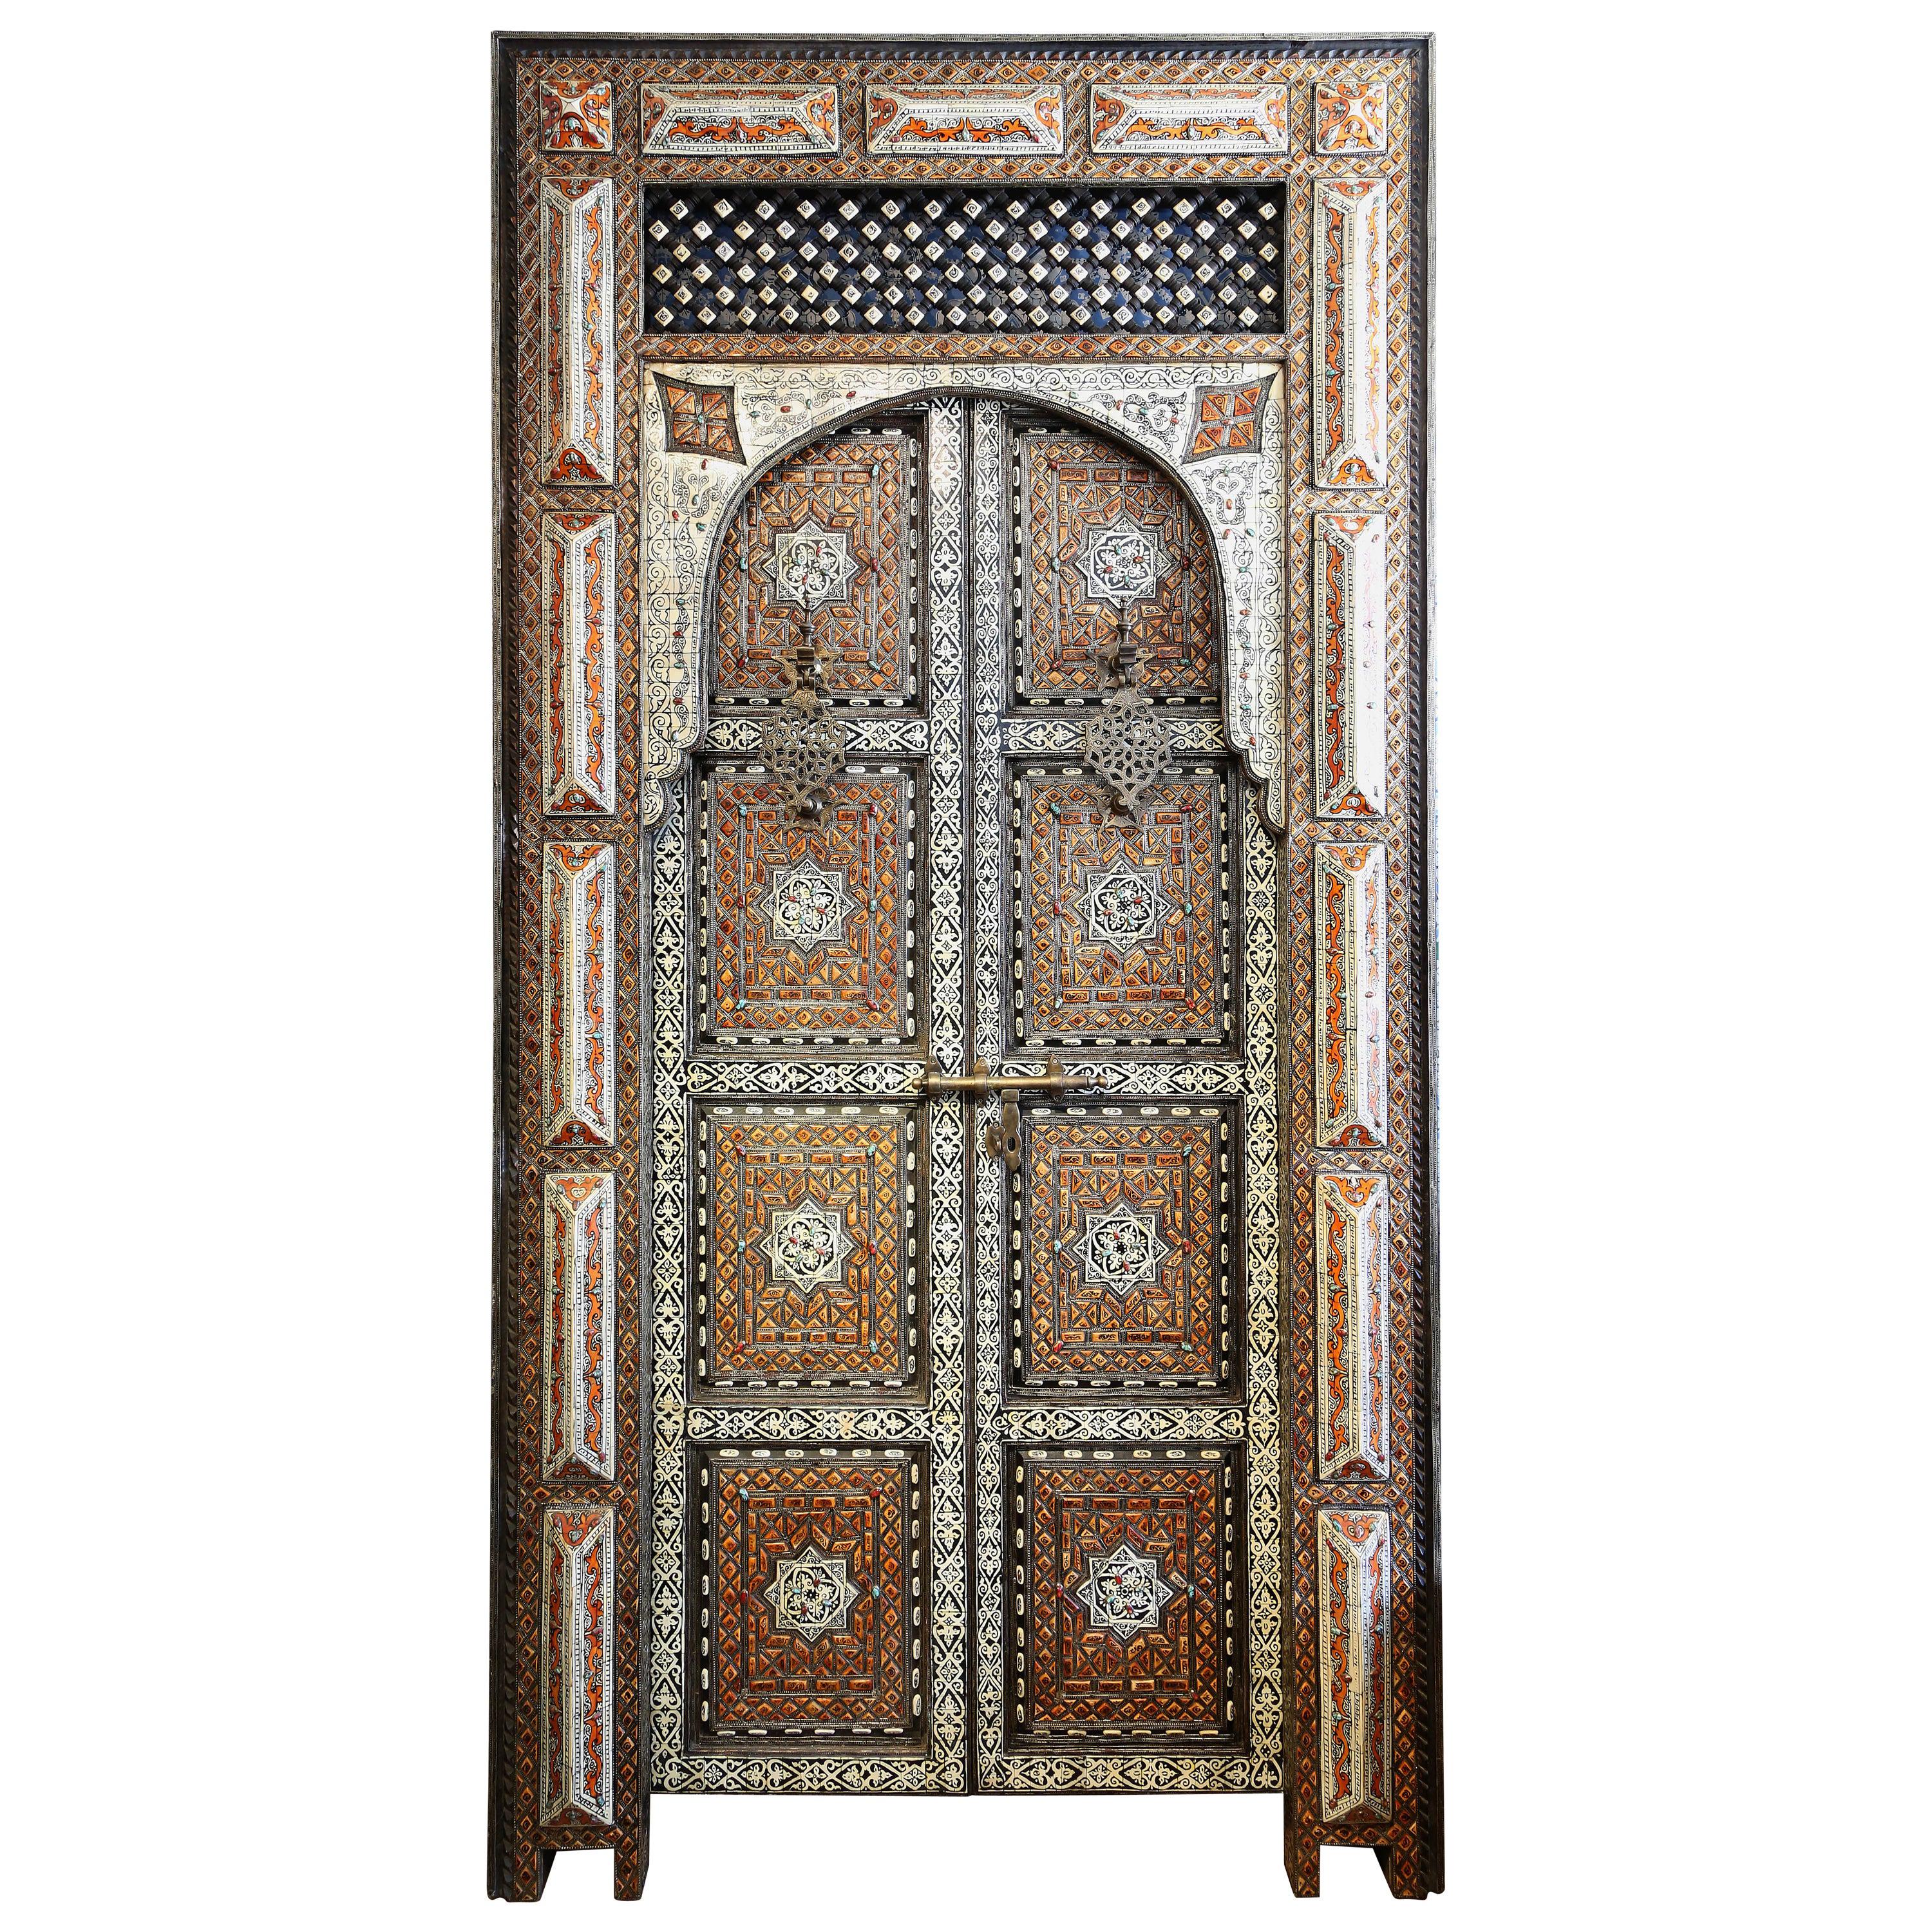 Exquisite Moroccan Palace Door with Camel Bone and Semi Precious Stones For Sale